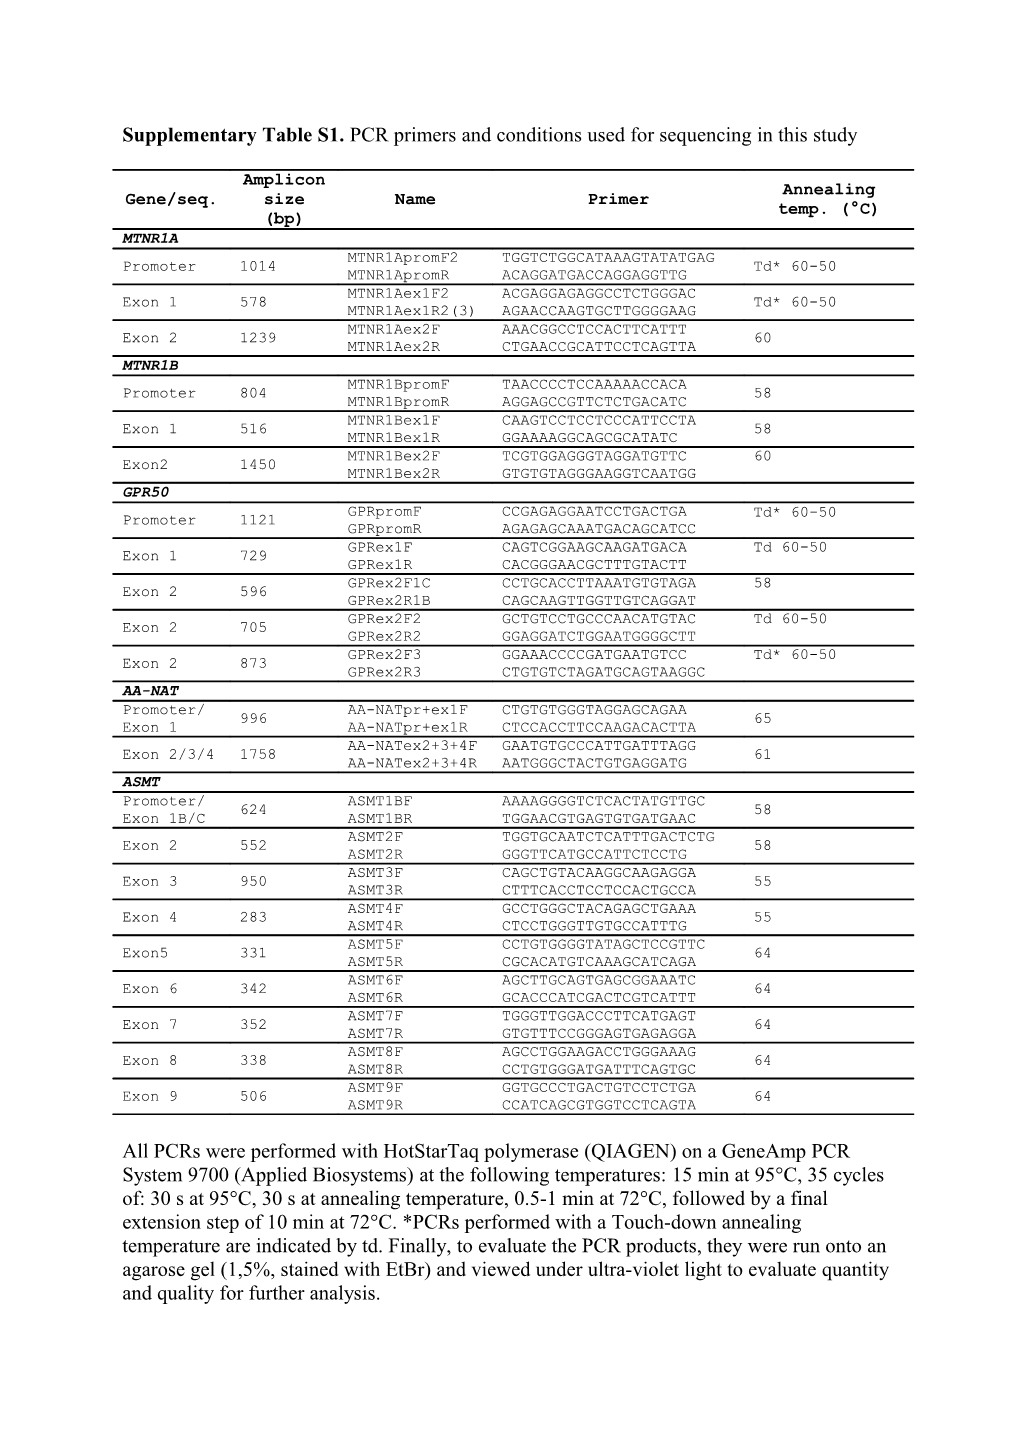 Supplementary Table S1. PCR Primers and Conditions Used for Sequencing in This Study